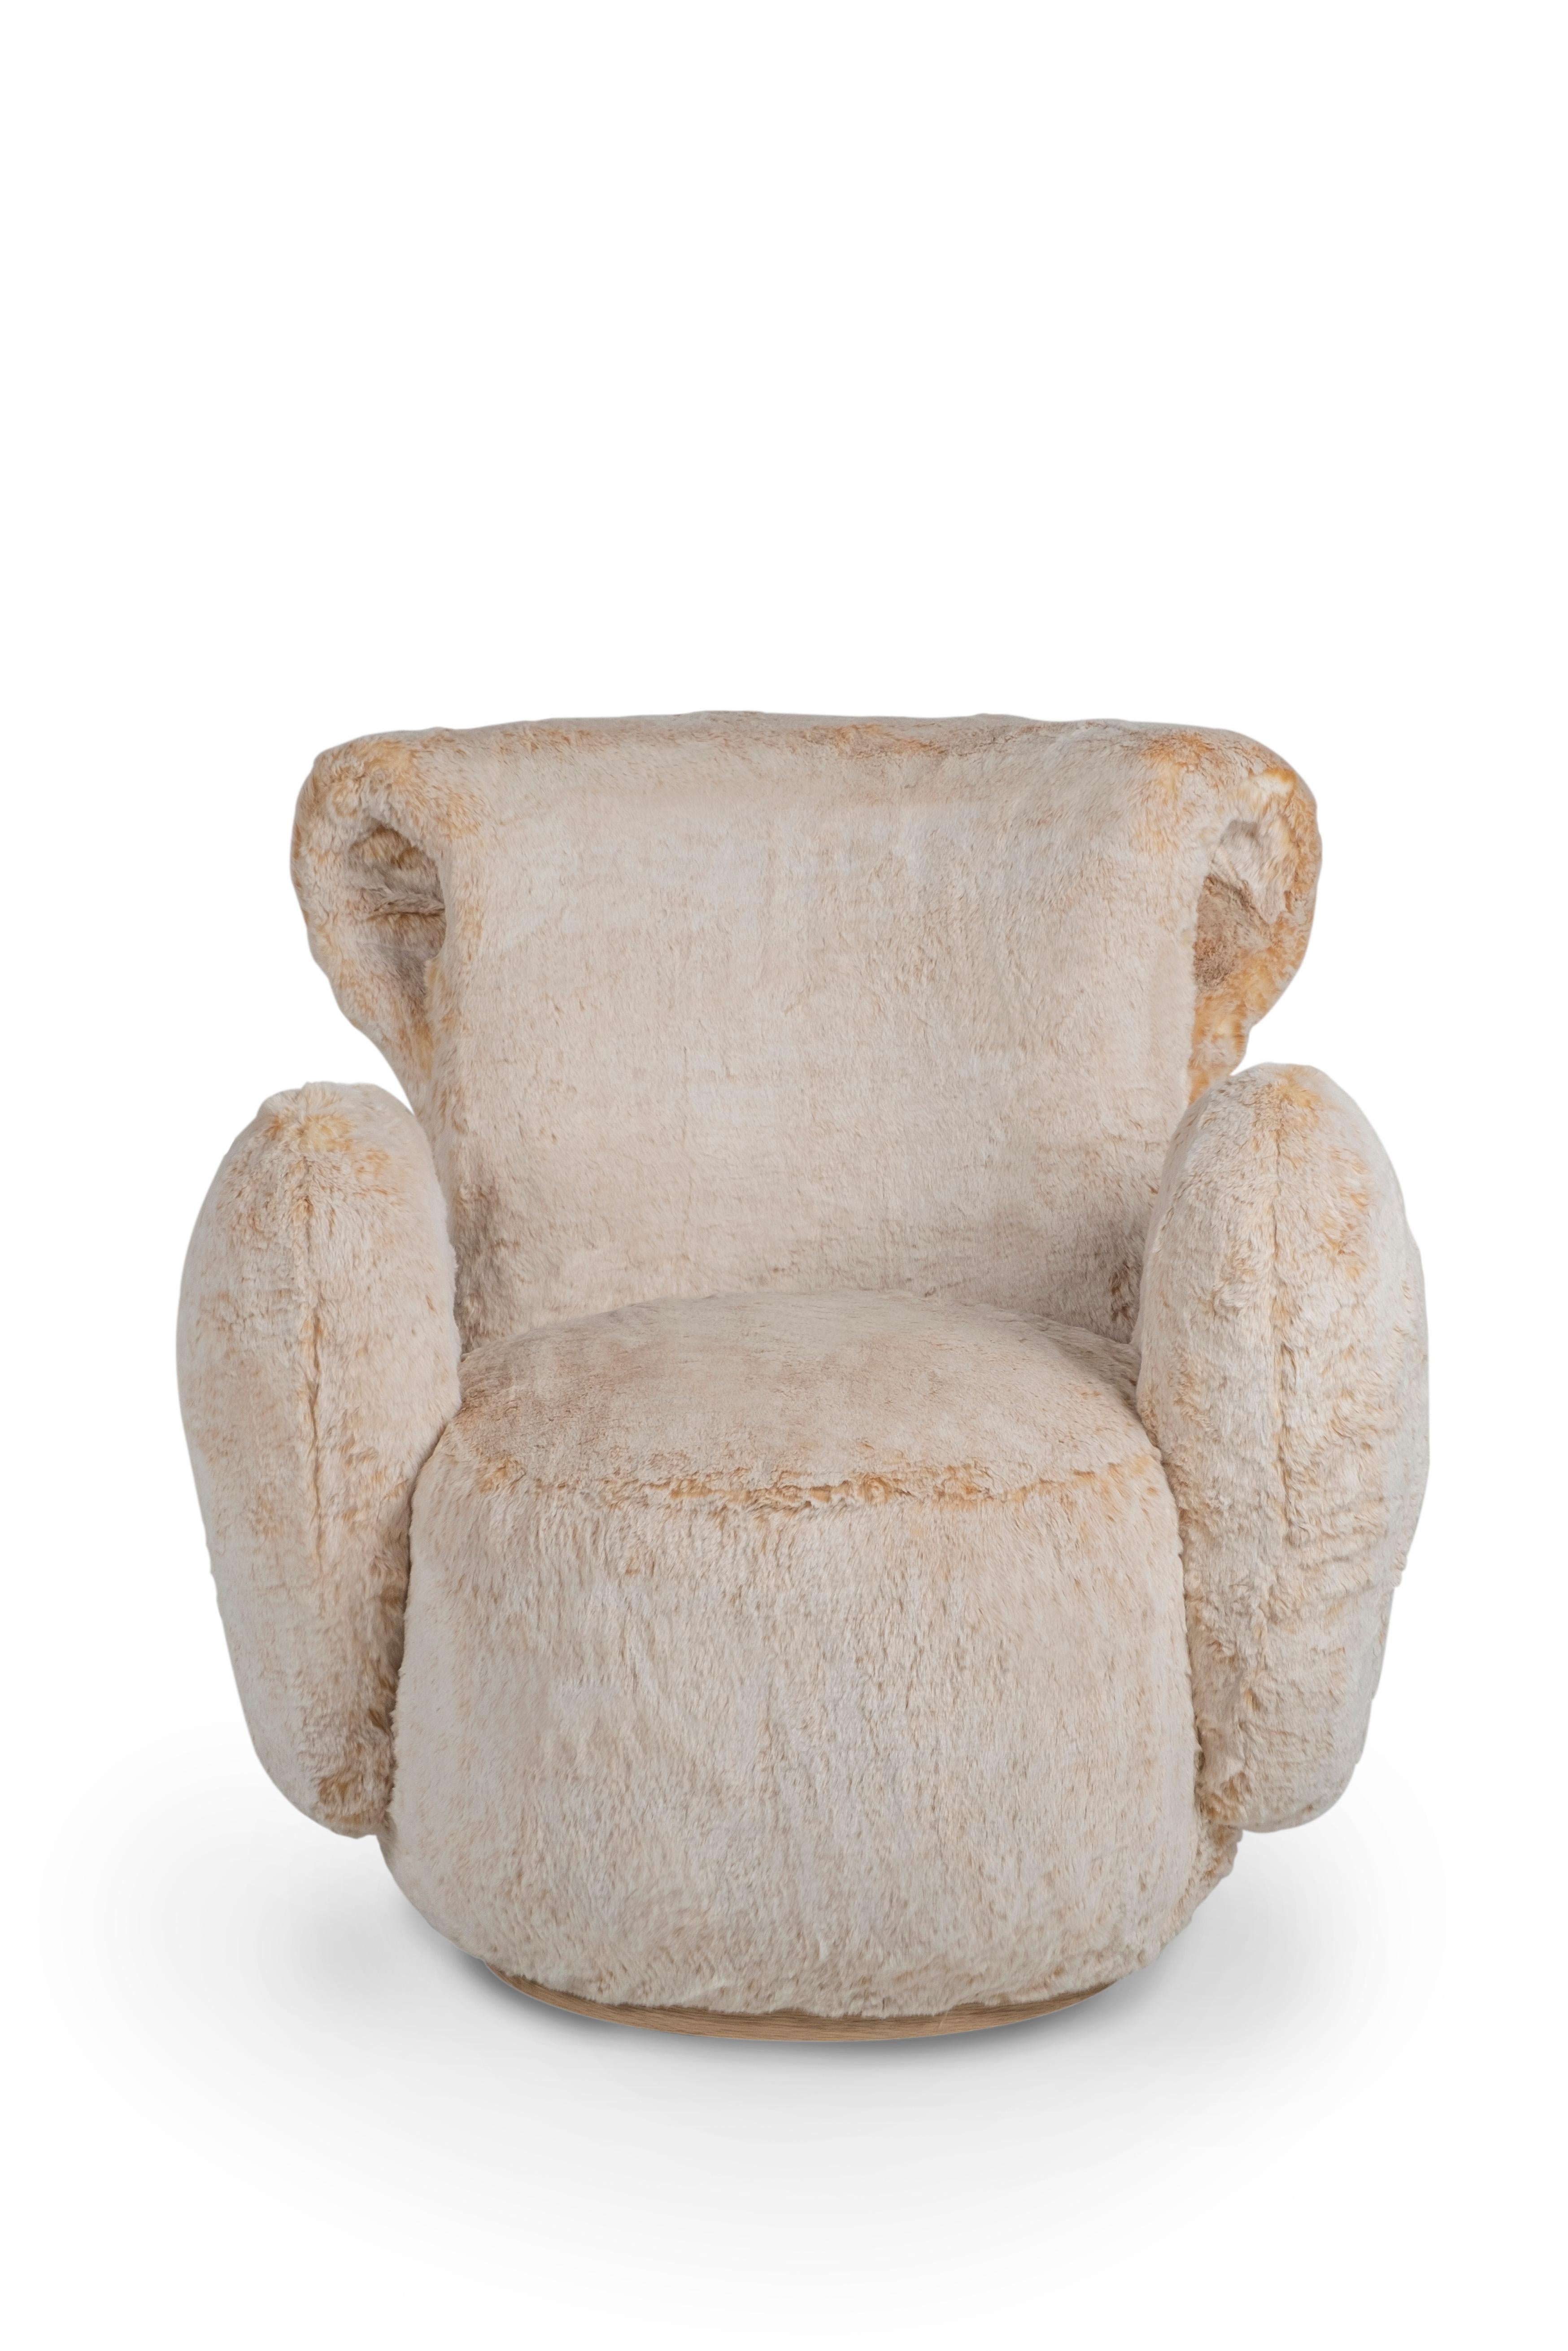 Burnished Moder Grass Armchair, Light Orange Faux Fur, Handmade in Portugal by Greenapple For Sale